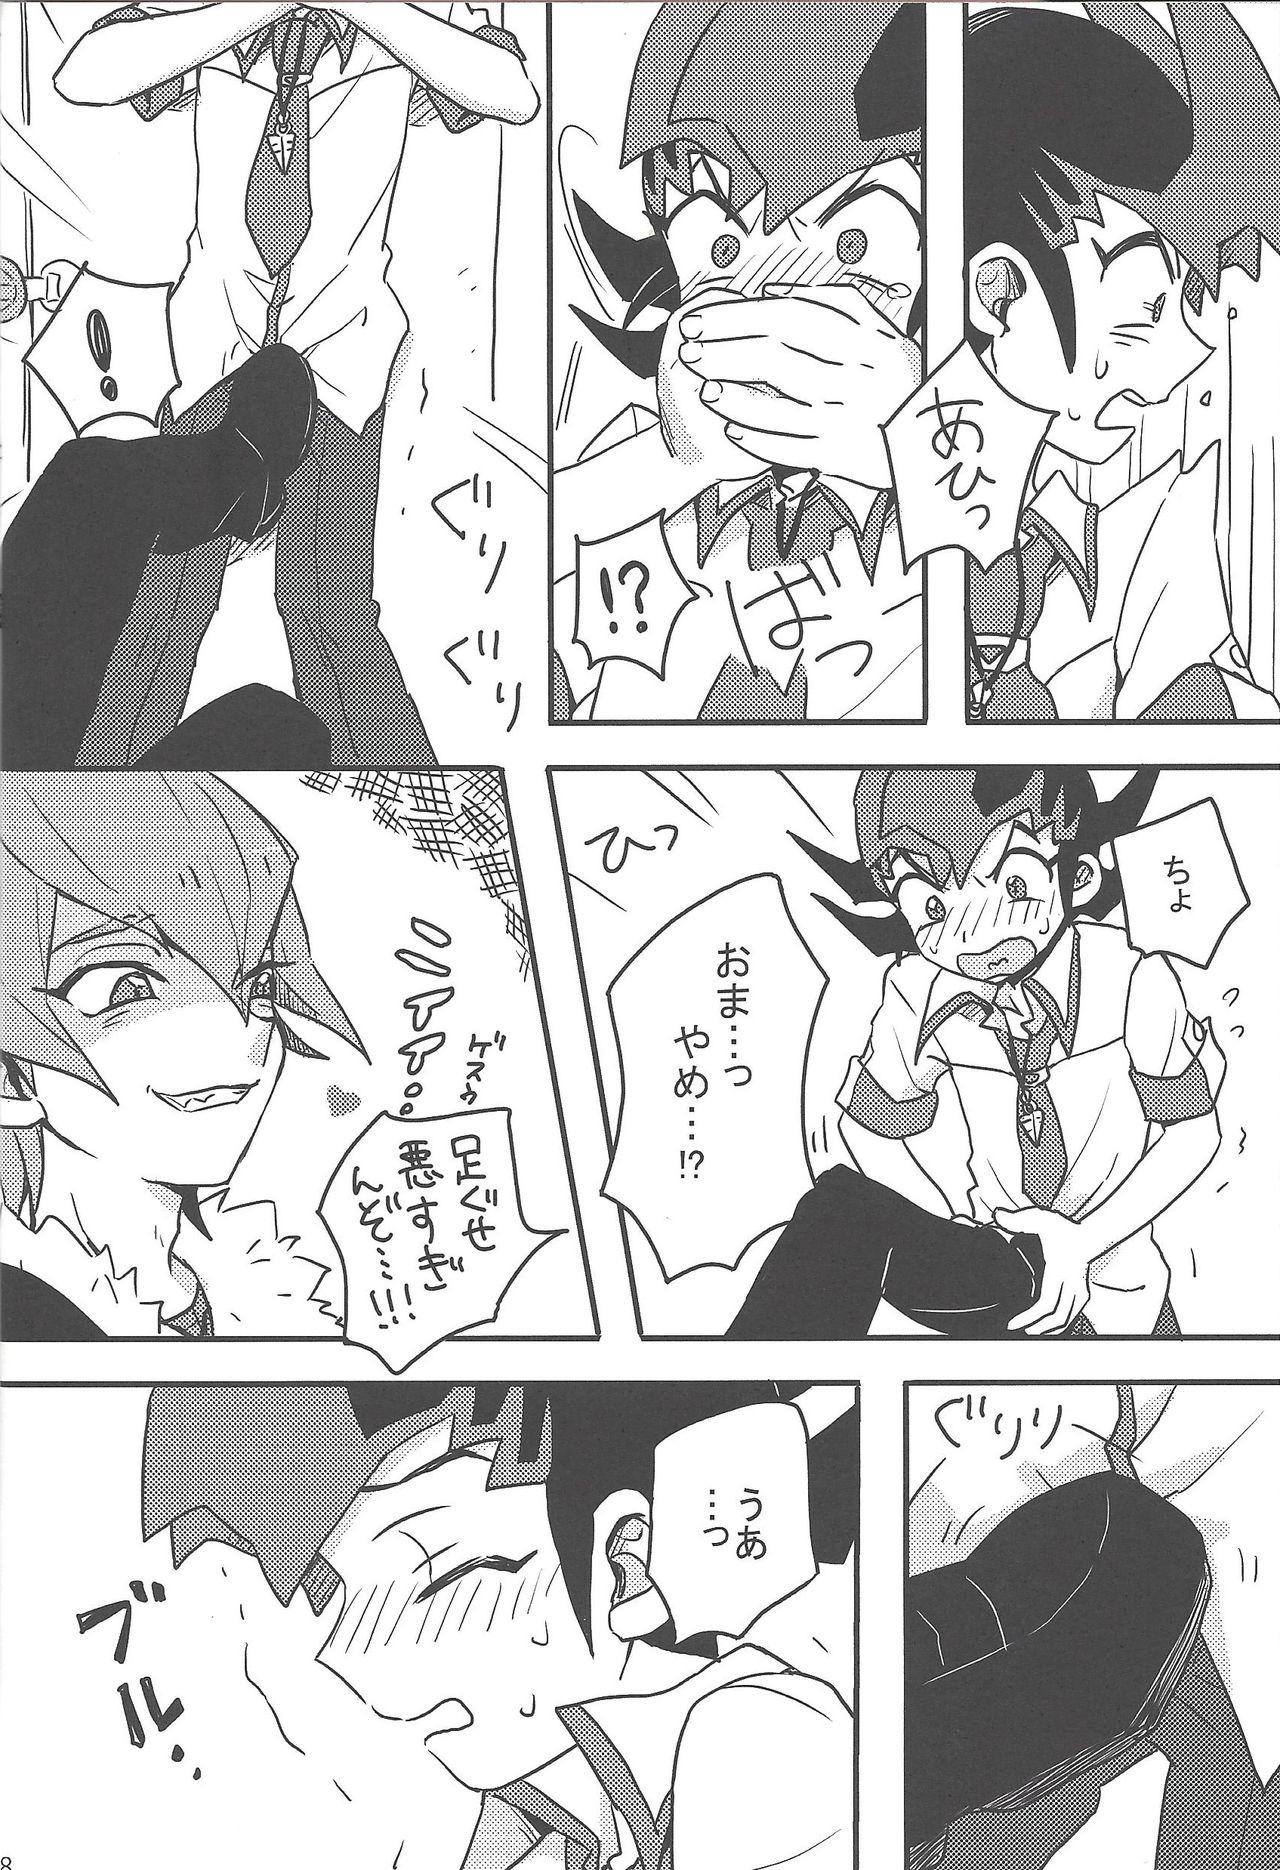 Asstomouth Now Playing SEX!! - Yu gi oh zexal Babe - Page 9